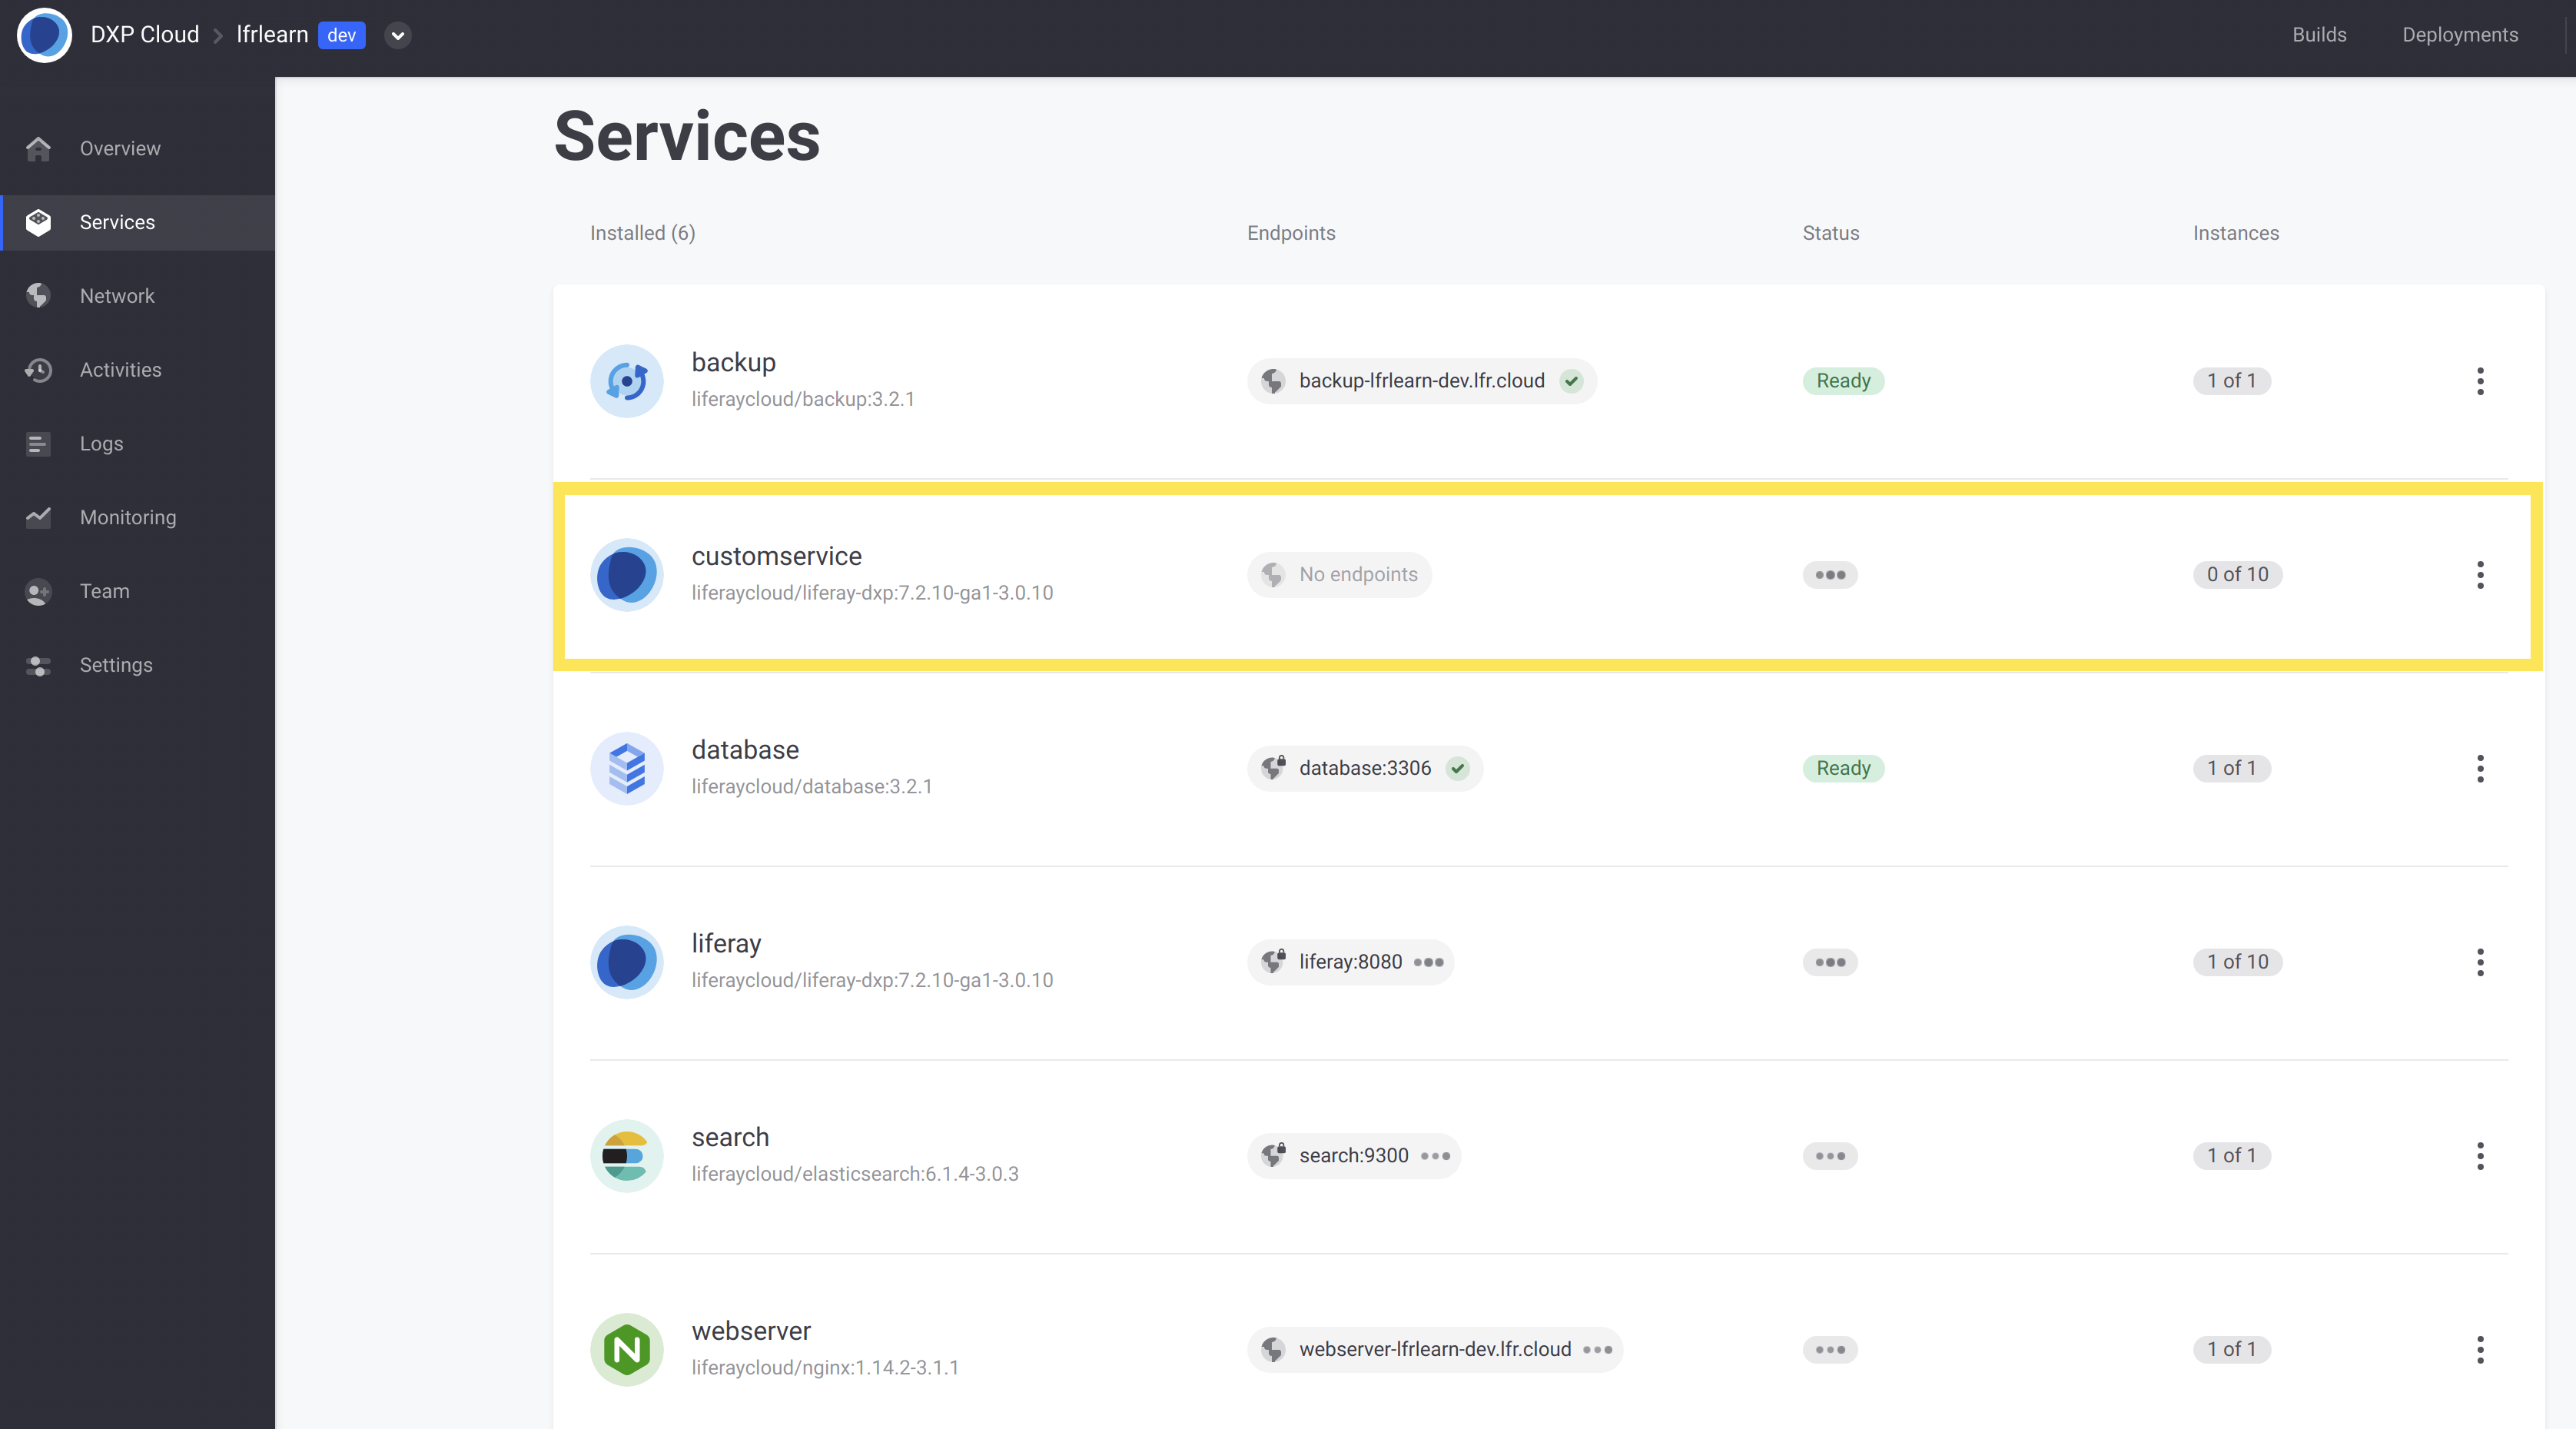 New customservice deploying alongside the other services.